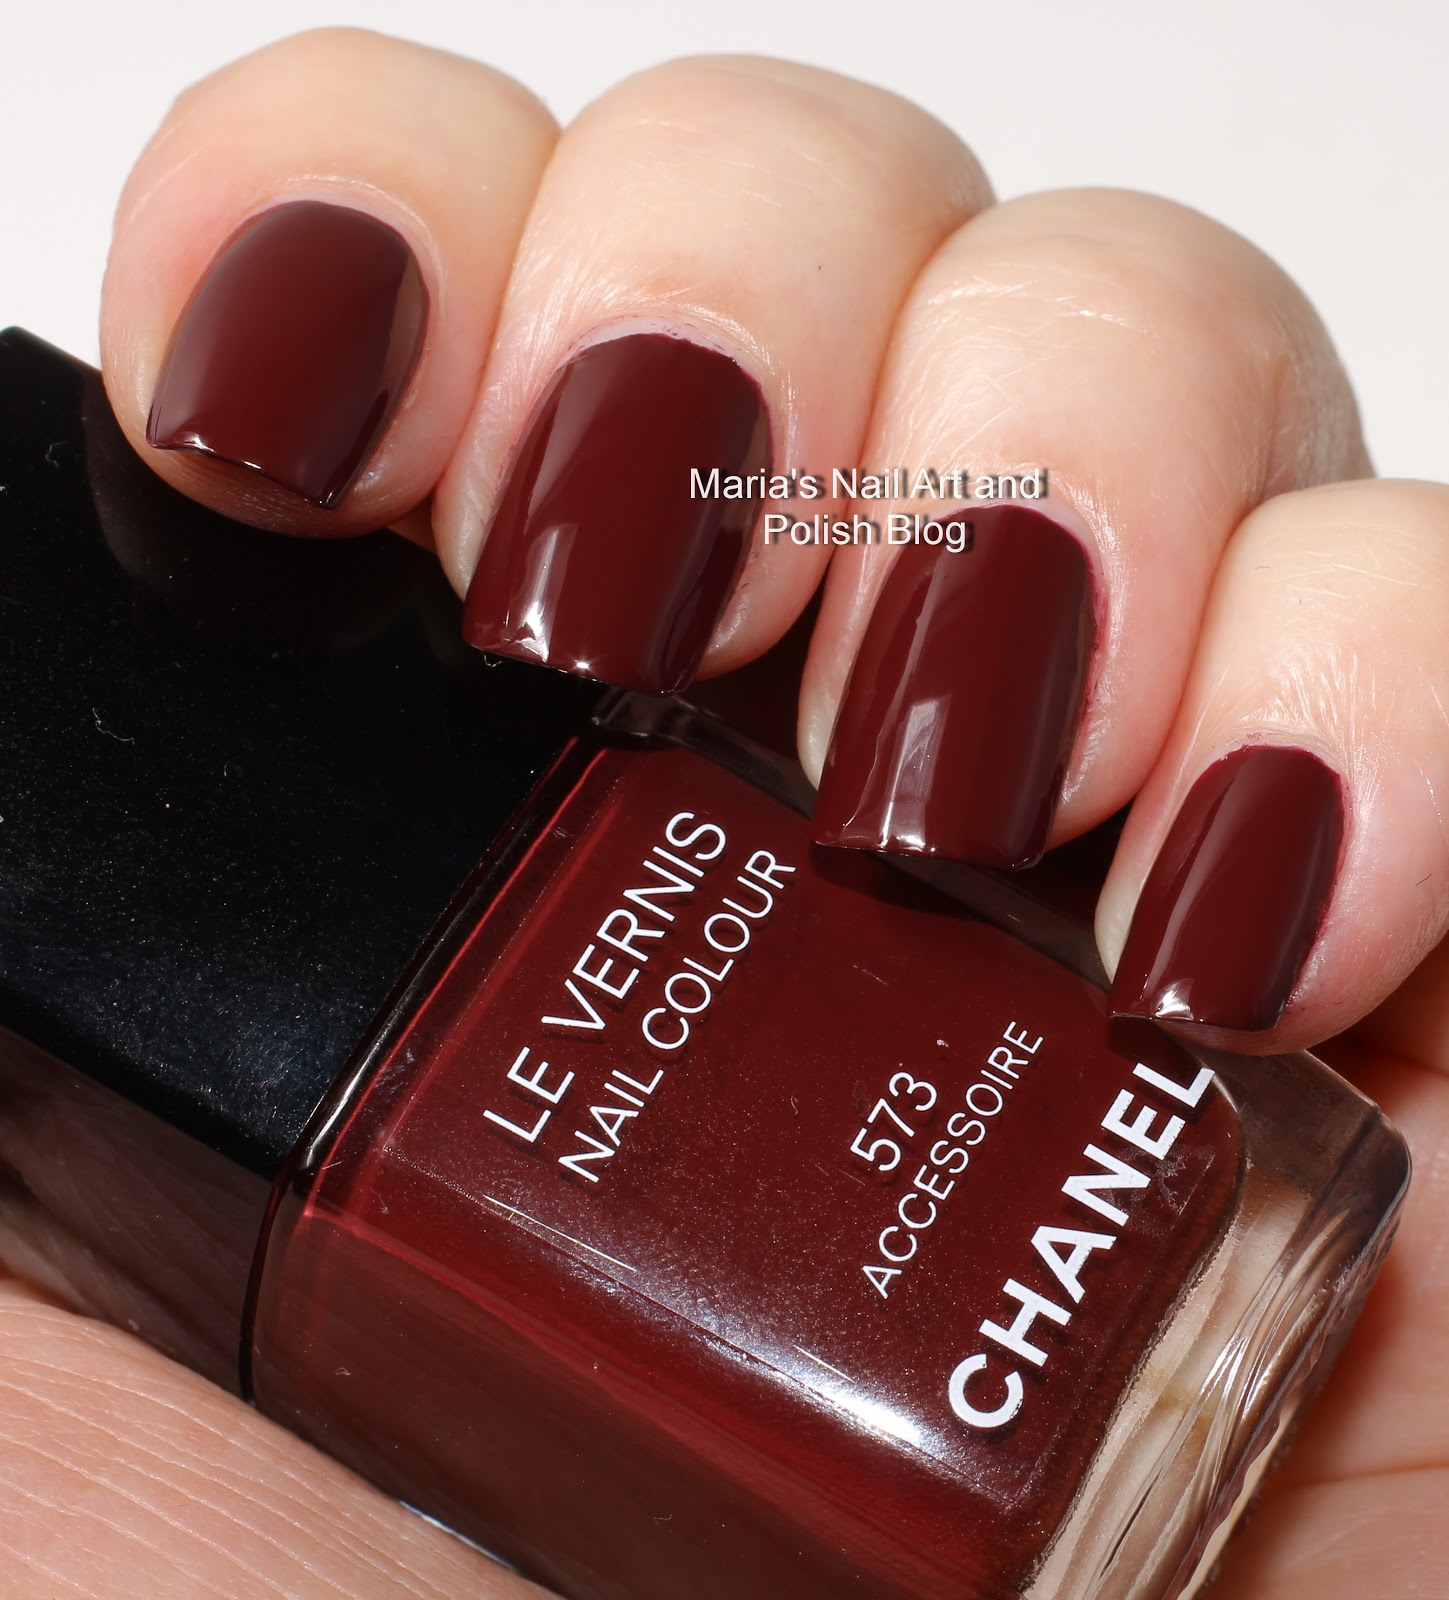 Manicure Monday: Chanel Le Vernis 573 Accessoire - From Head To Toe